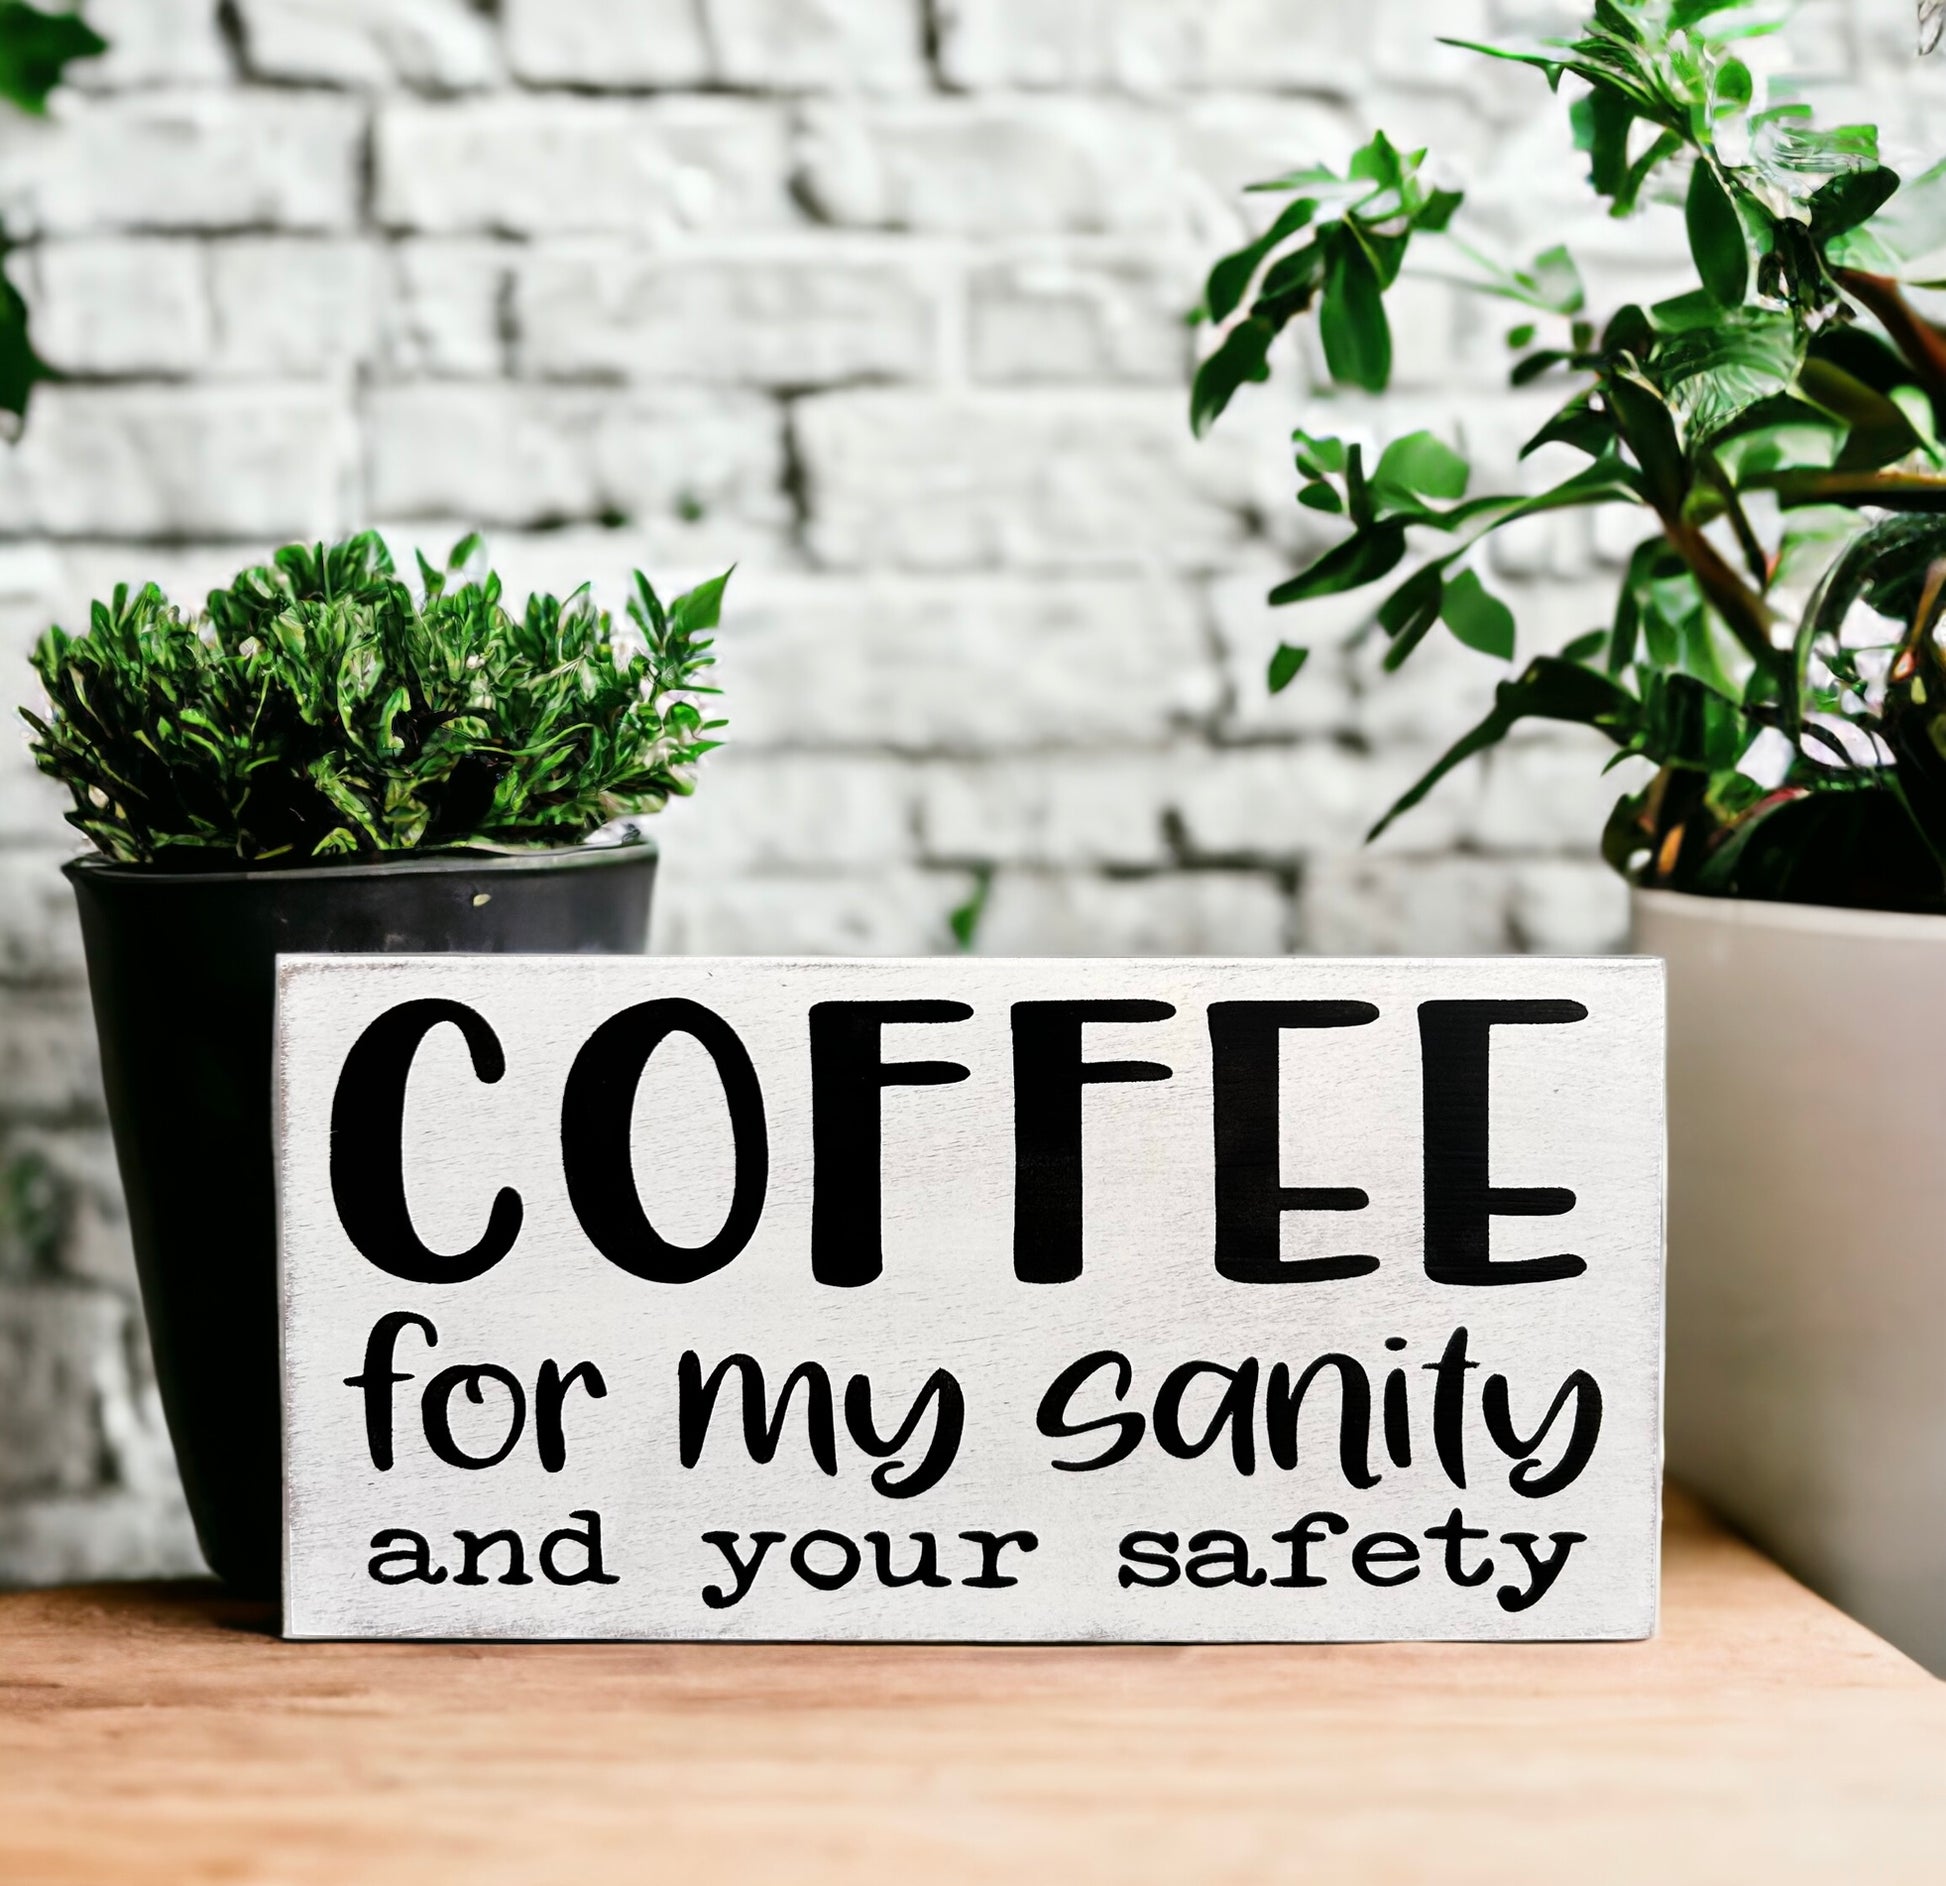 Funny "Coffee for my sanity" wood sign